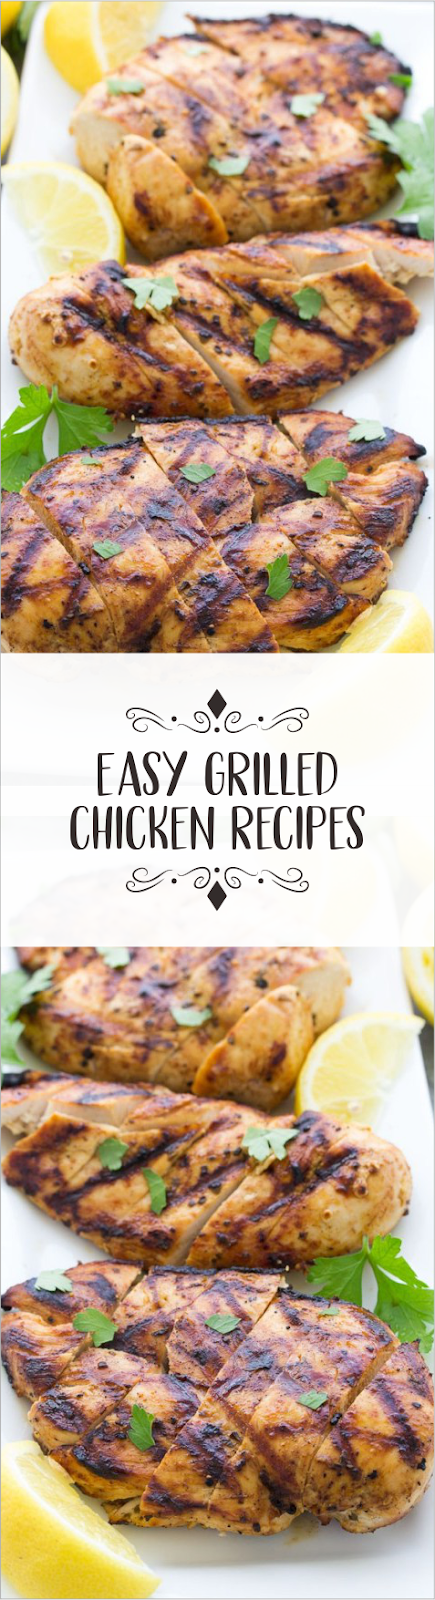 Easy Grilled Chicken Recip | Briana Berge